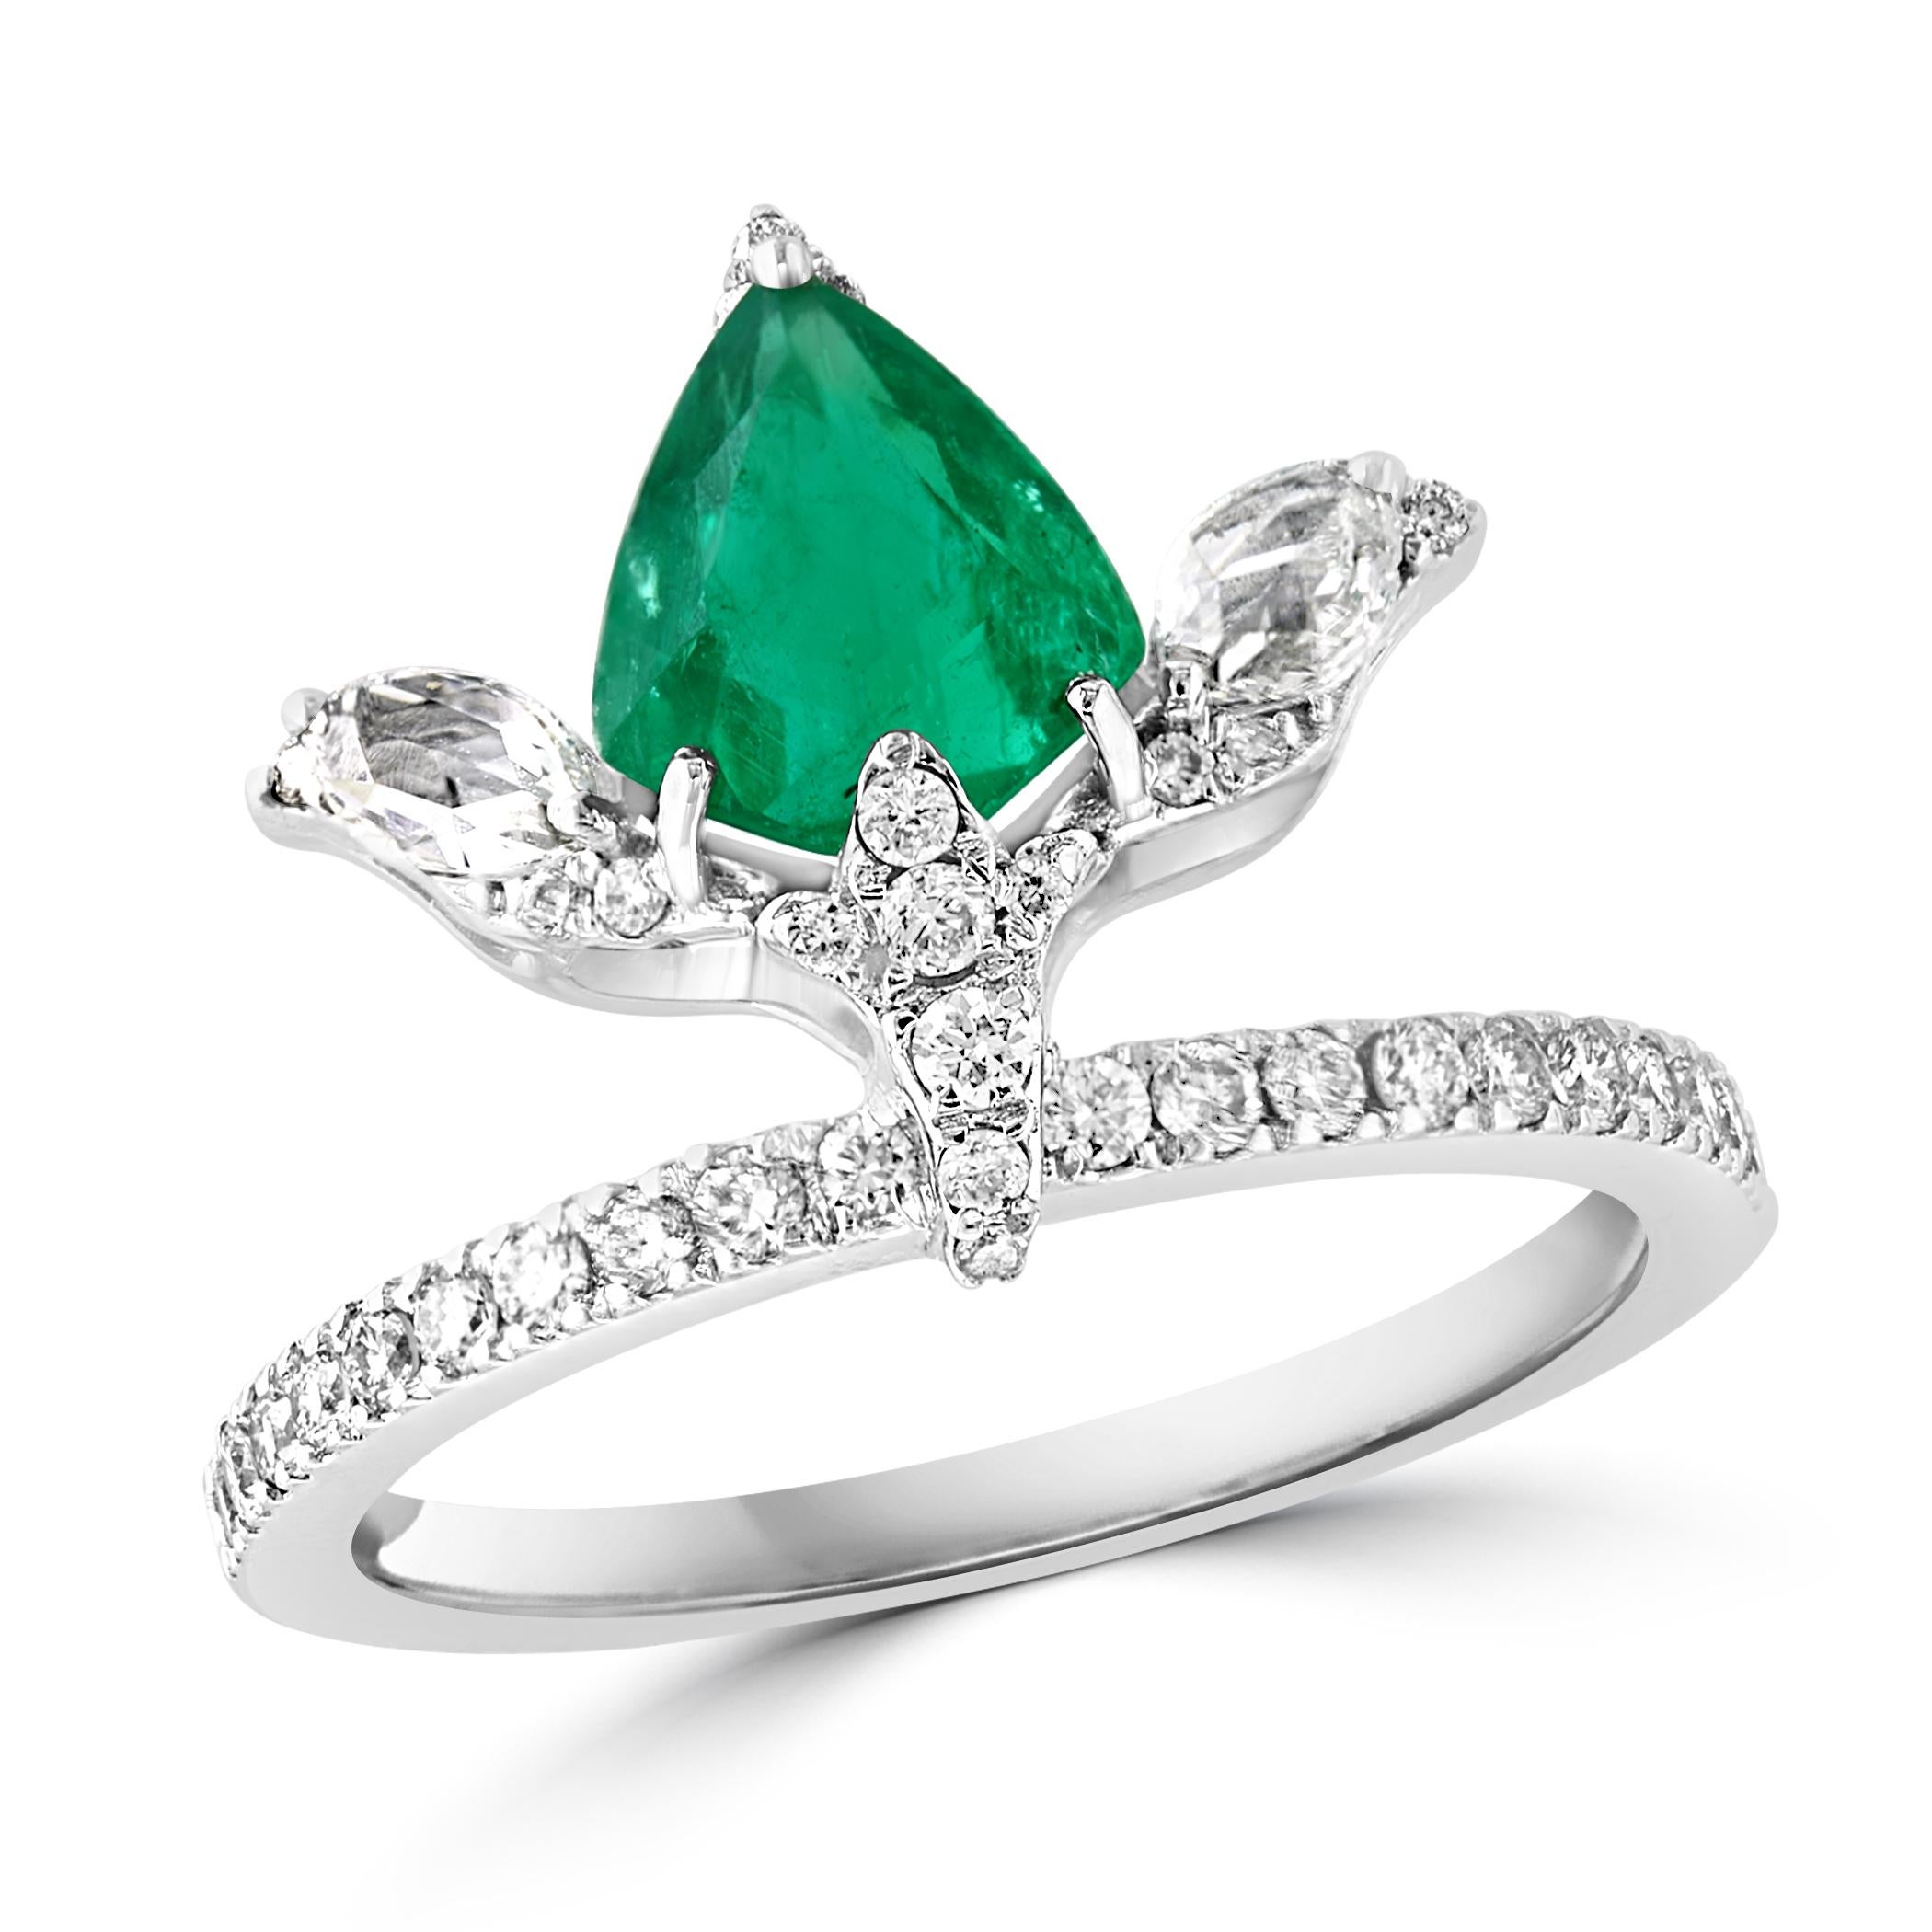 1.2 Ct Finest Emerald in Pear Shape & 1 Ct Diamond Ring in 18 Kt Gold Size 6.5 A Classic, ring Pear shape Emerald, Absolutely gorgeous emerald, Very desirable in color, Extreme fine quality, color and luster. Absolutely clean emerald. 
Origin: